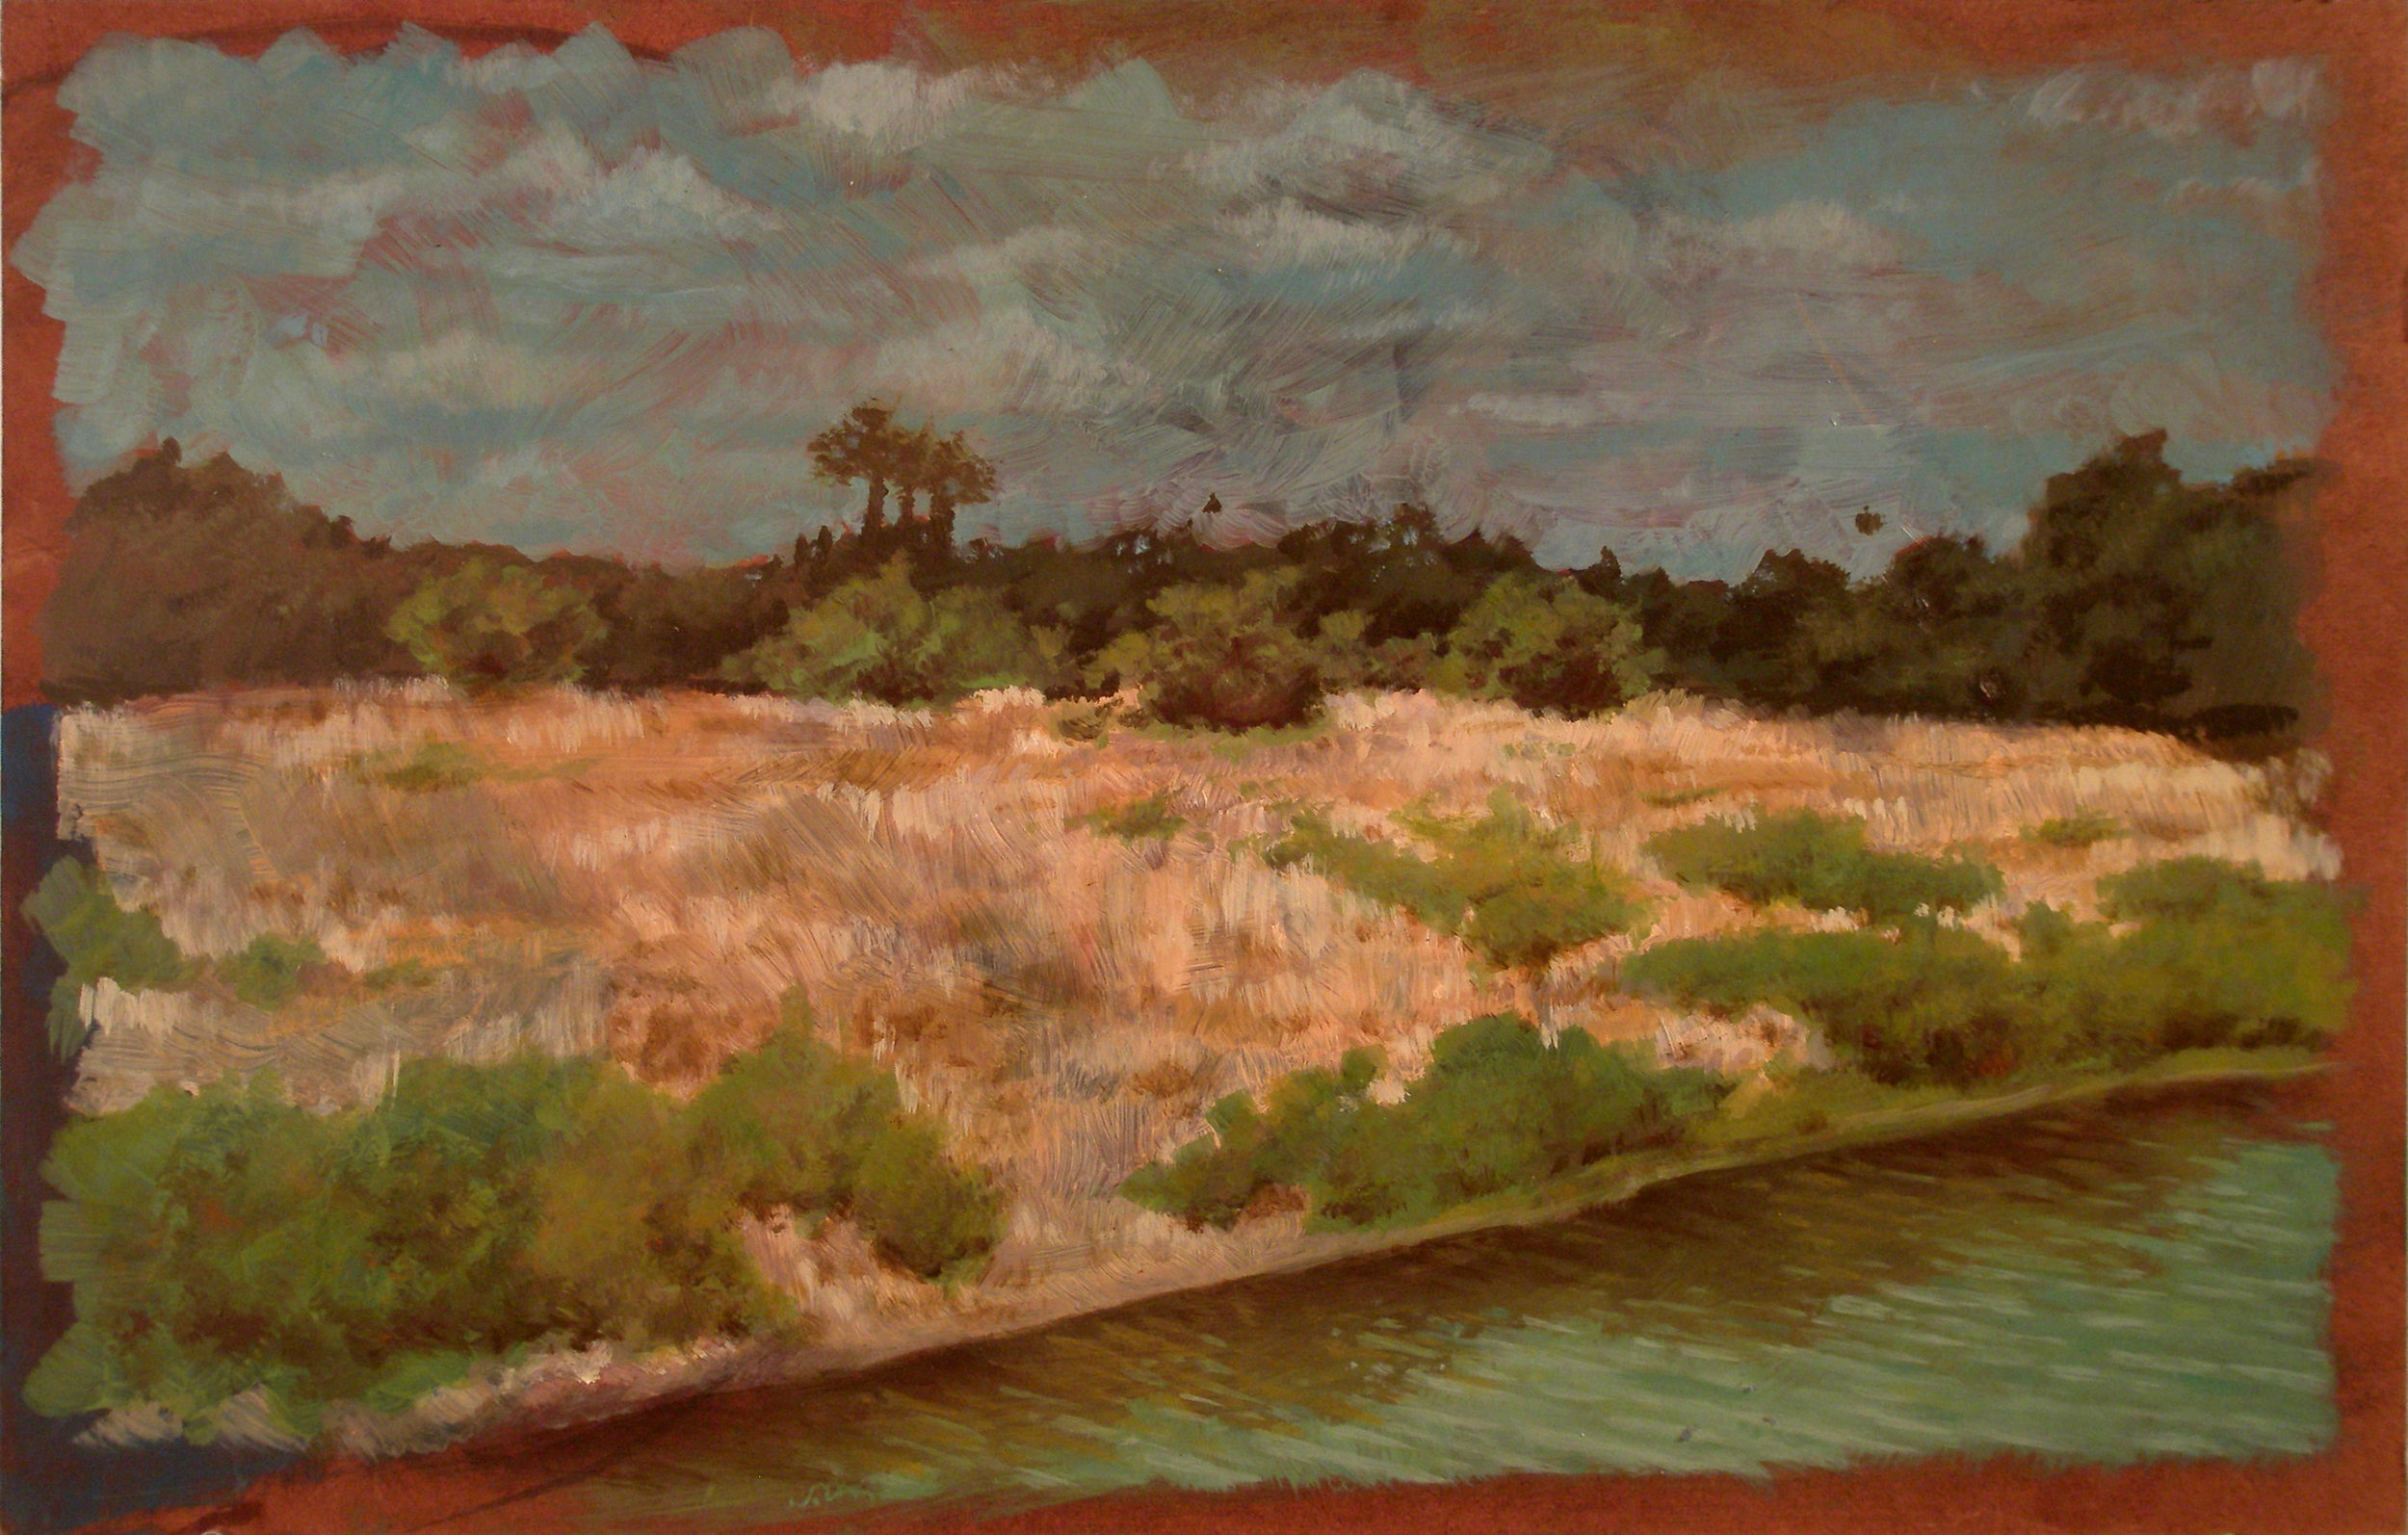   Myakka  oil on masonite, Myakka River State Park. 2012    owned by Private Collector    exhibited -  Daggerwing Nature Center, Boca Raton, FL 2016  